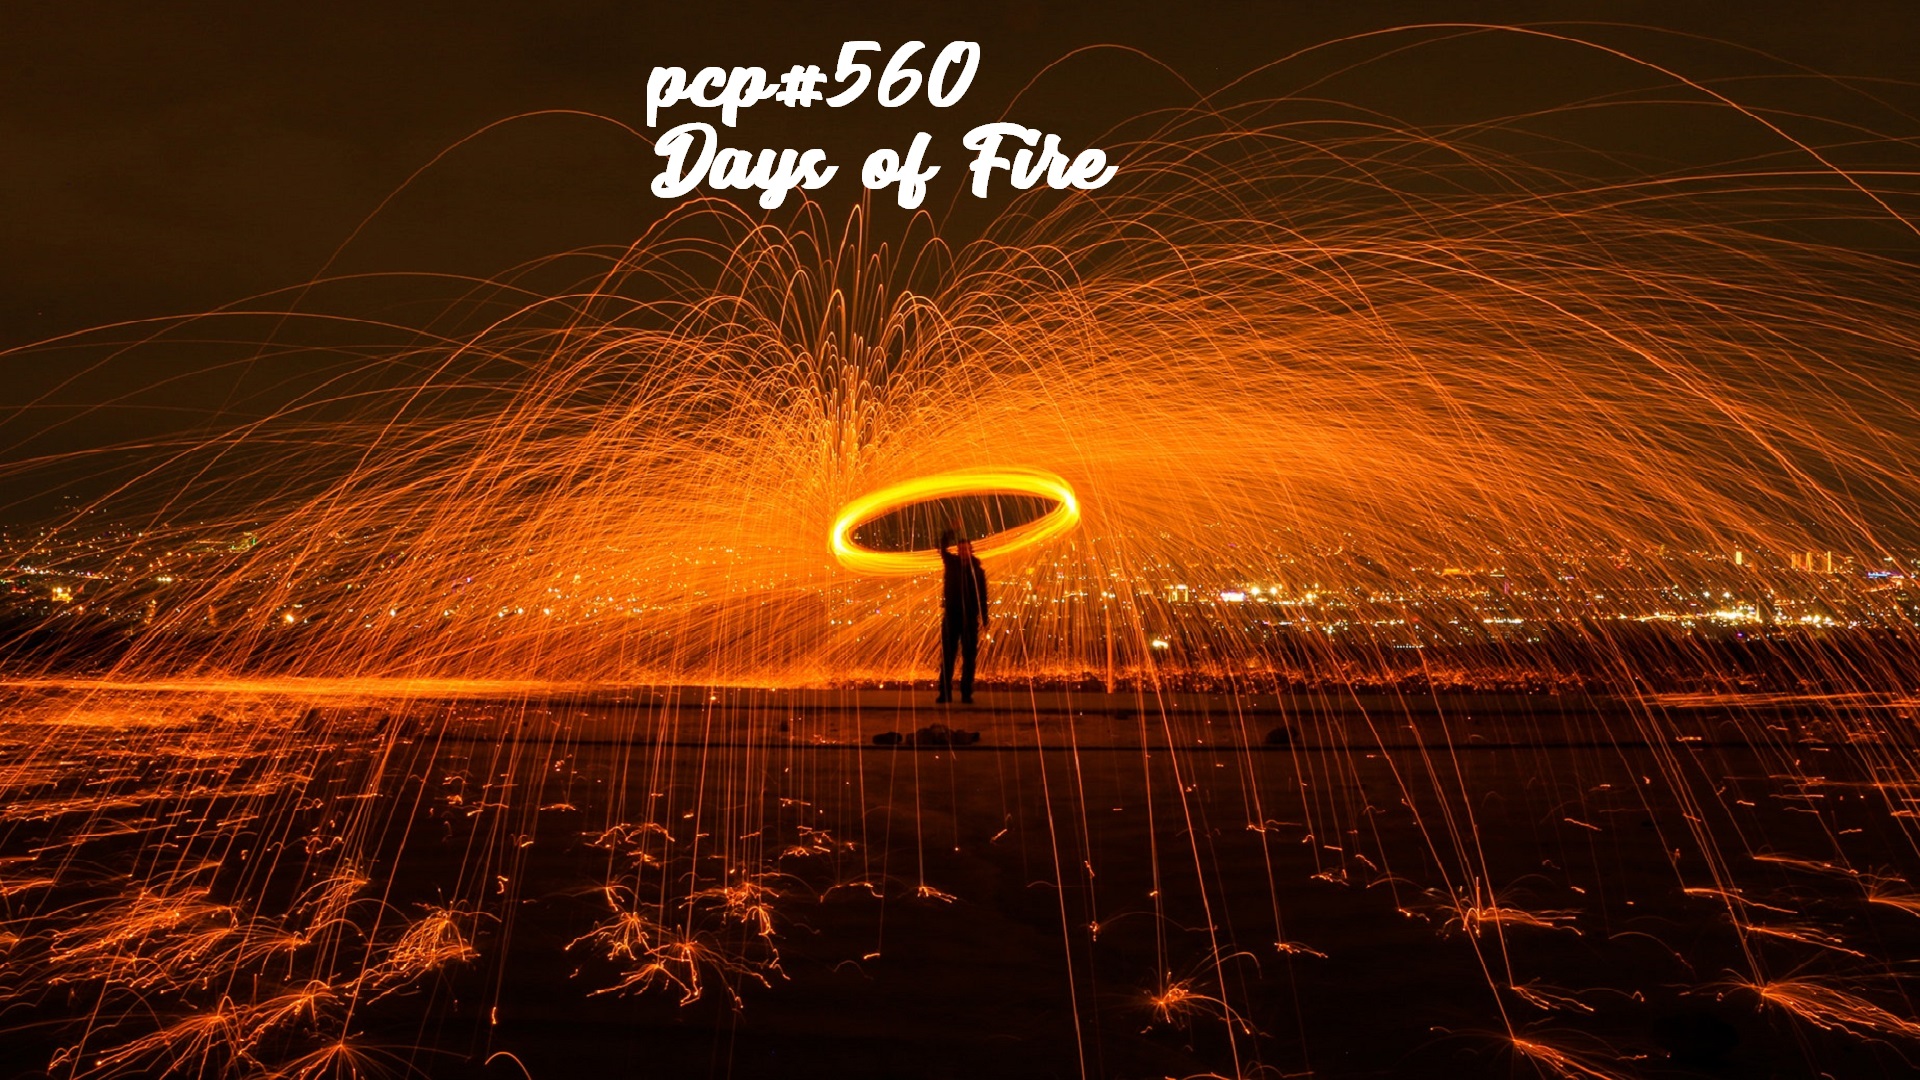 PCP#560... Days of Fire....